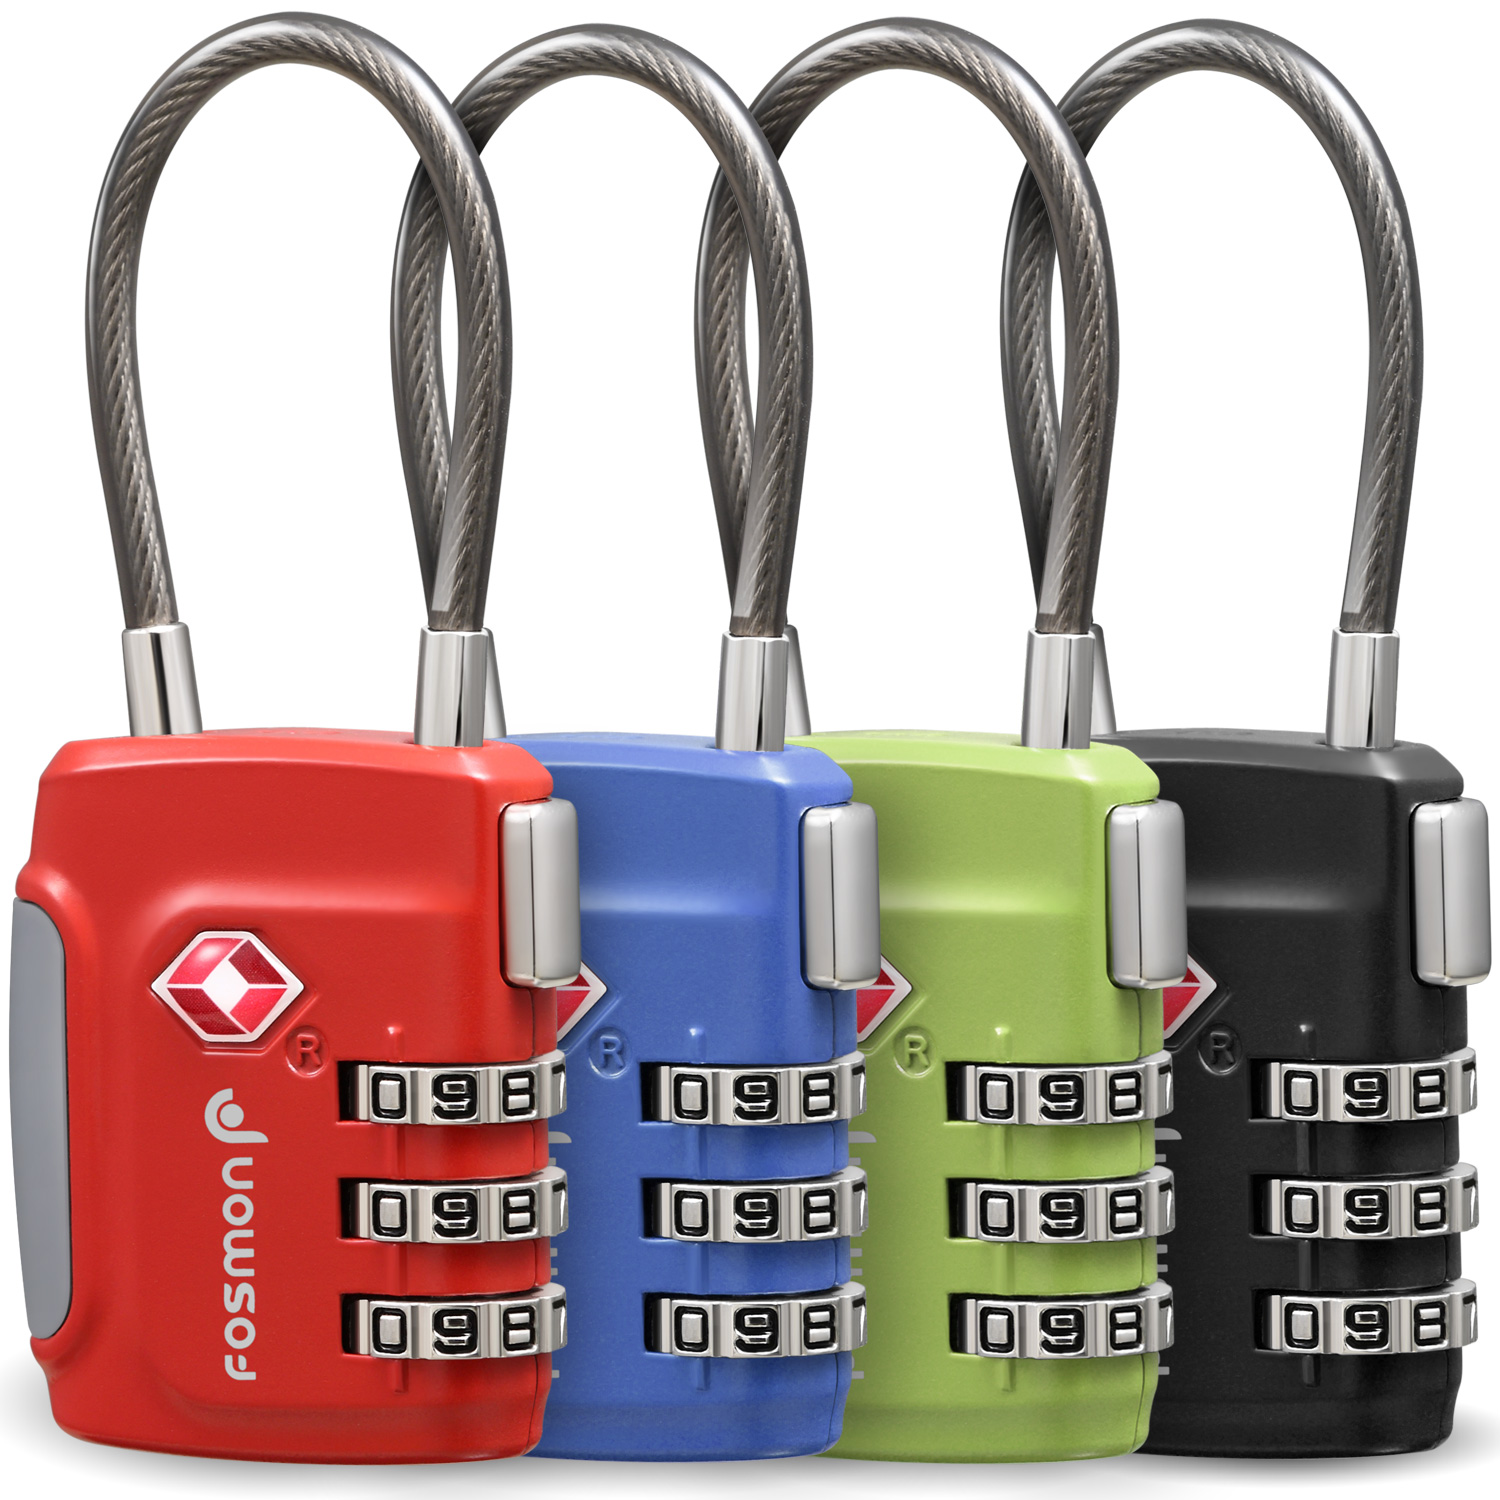 Fosmon TSA Accepted Cable Luggage Locks, (4 Pack) Re-settable Easy to Read  Digit Combination with Alloy Body and Release Button for Travel Bag, Suit  Case  Luggage Black, Green, Red